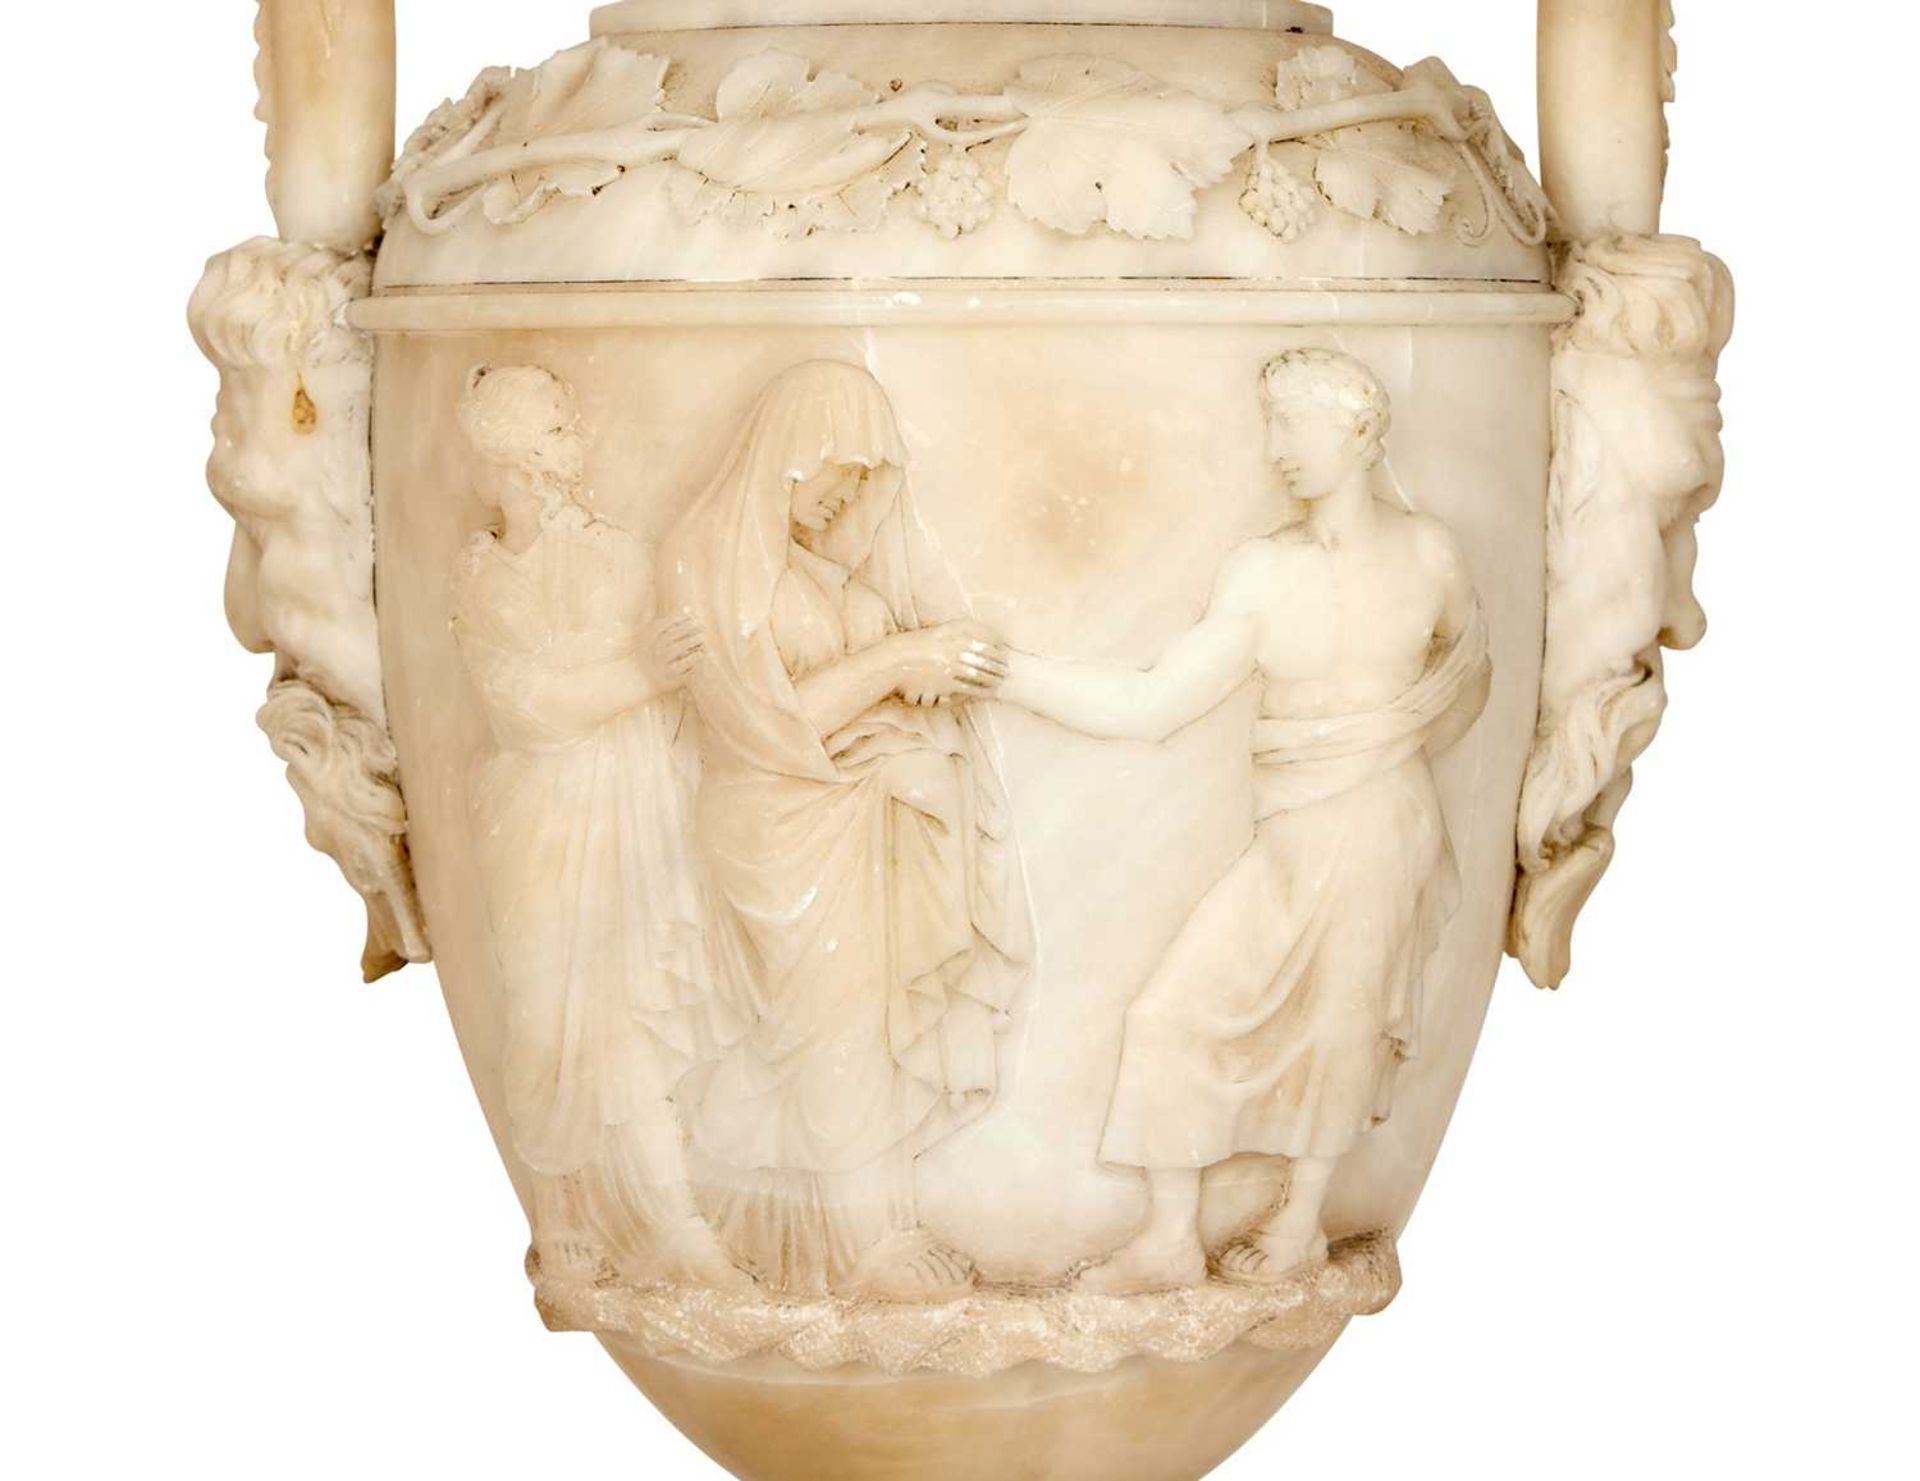 A LARGE PAIR OF 19TH CENTURY ITALIAN ALABASTER URNS AND COVERS IN THE STYLE OF PIRANESI - Image 6 of 12